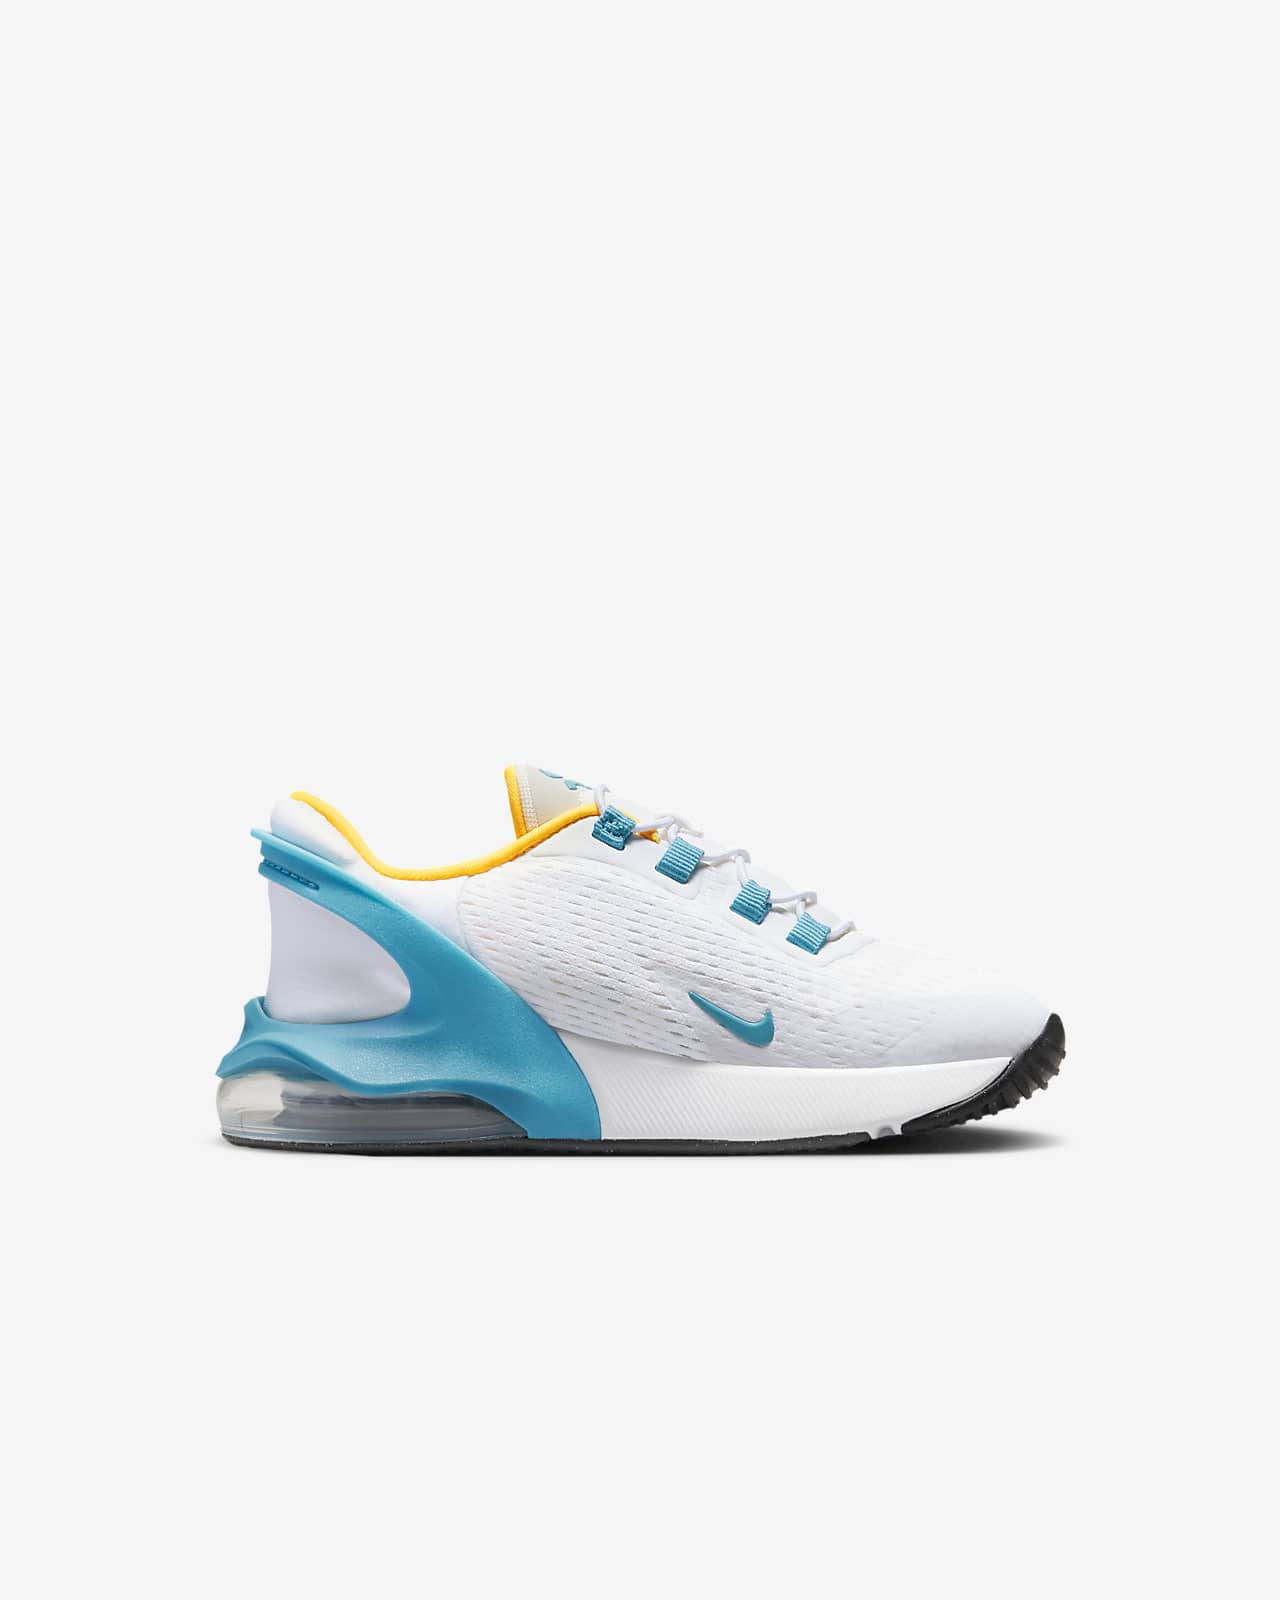 Discreet Cokes Voorkomen Nike Air Max 270 GO Younger Kids' Easy On/Off Shoes. Nike LU